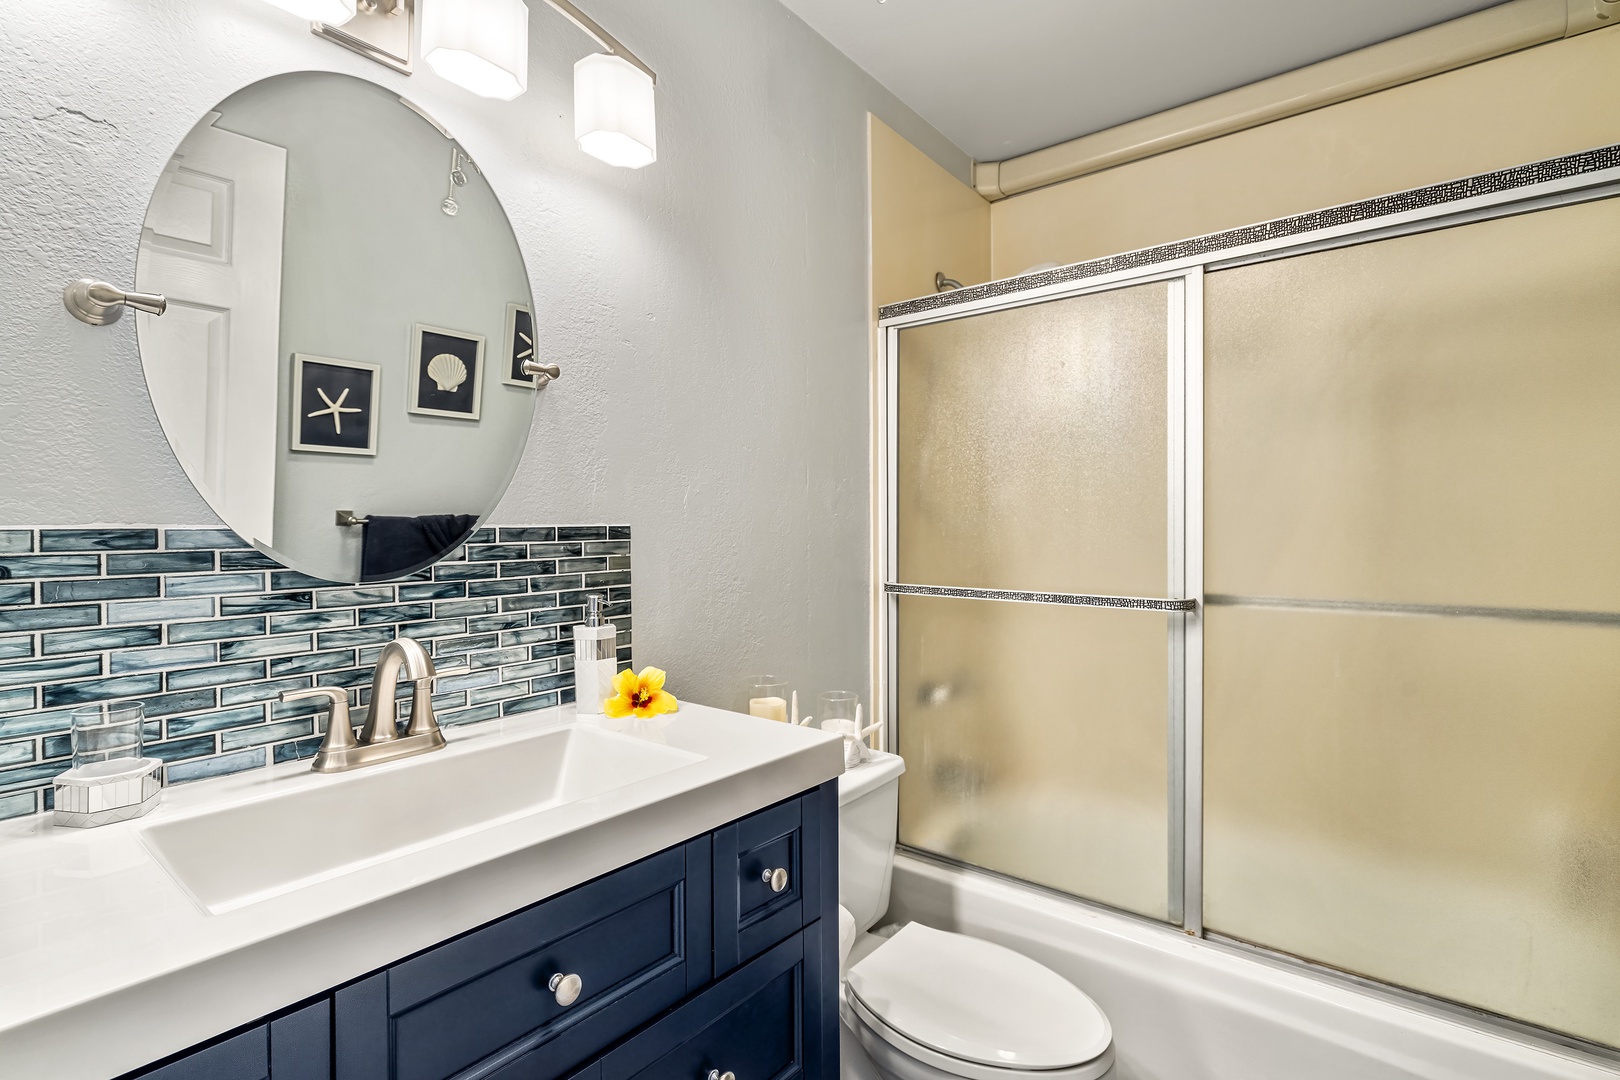 Kailua Kona Vacation Rentals, Keauhou Kona Surf & Racquet 9303 - Detached guest bathroom with modern touches and tub shower combo